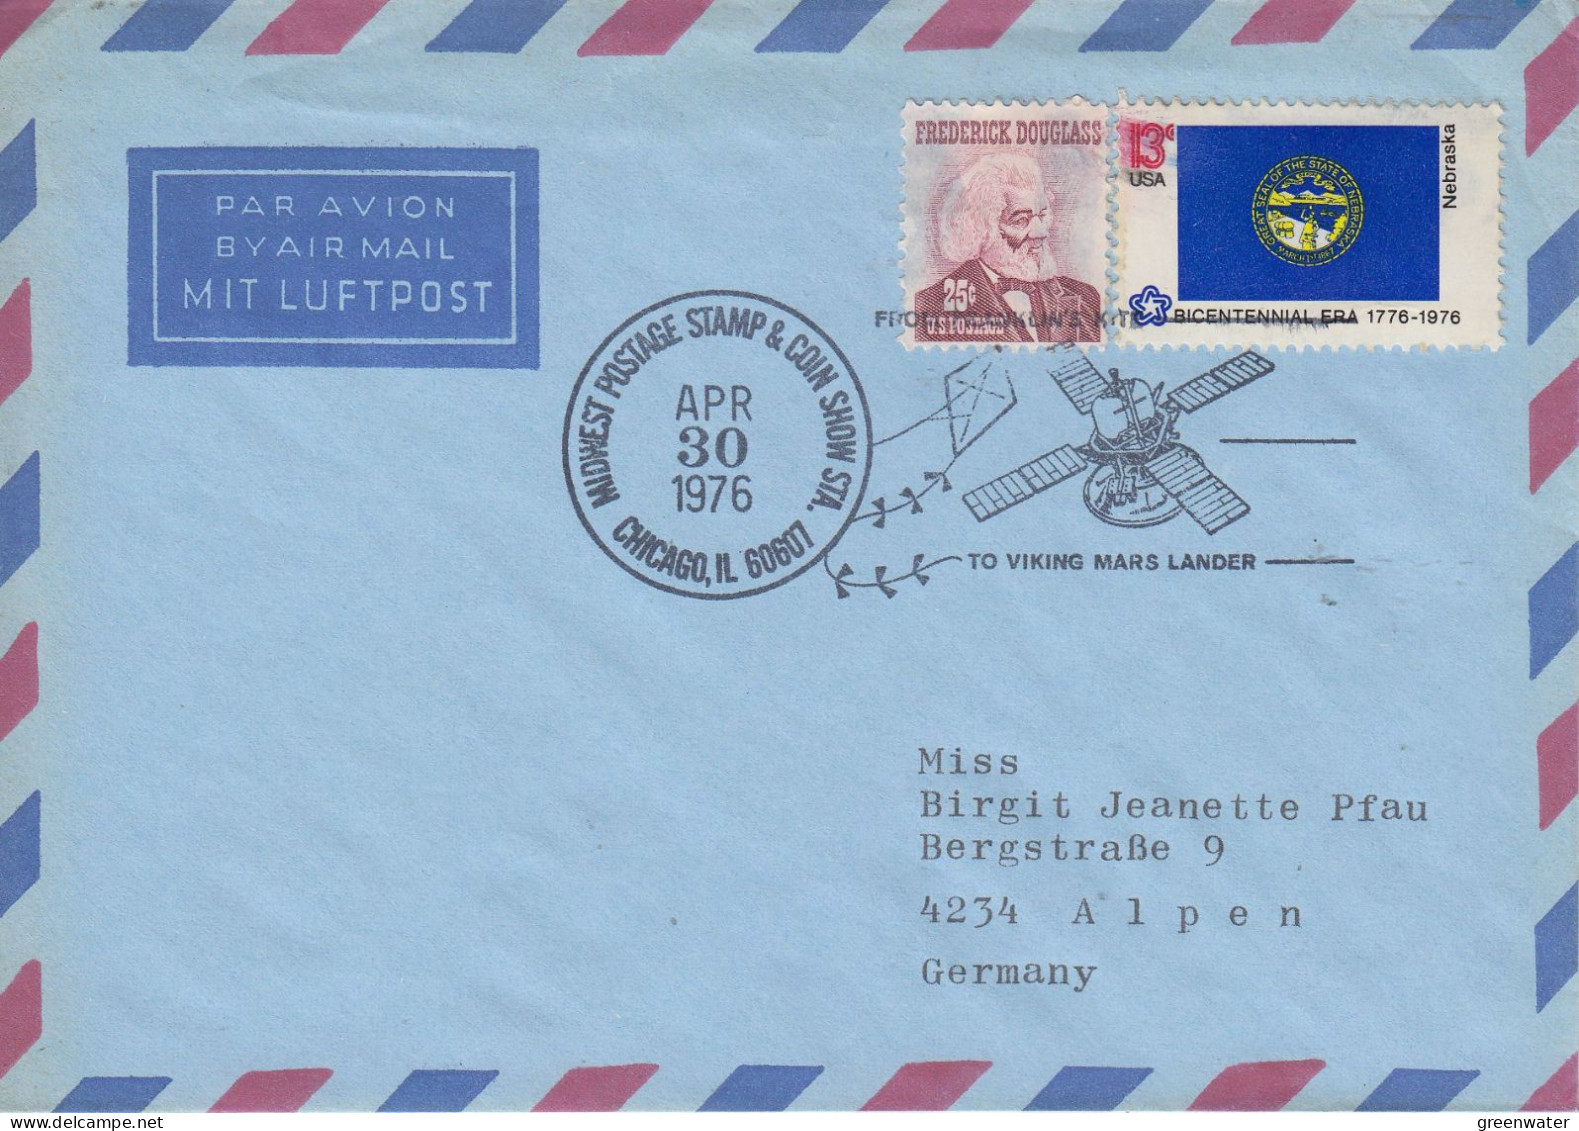 USA To Viking Mars Lander Ca Chicago  Midwest Stamp Show APR 30 1976 (SD221) - North  America